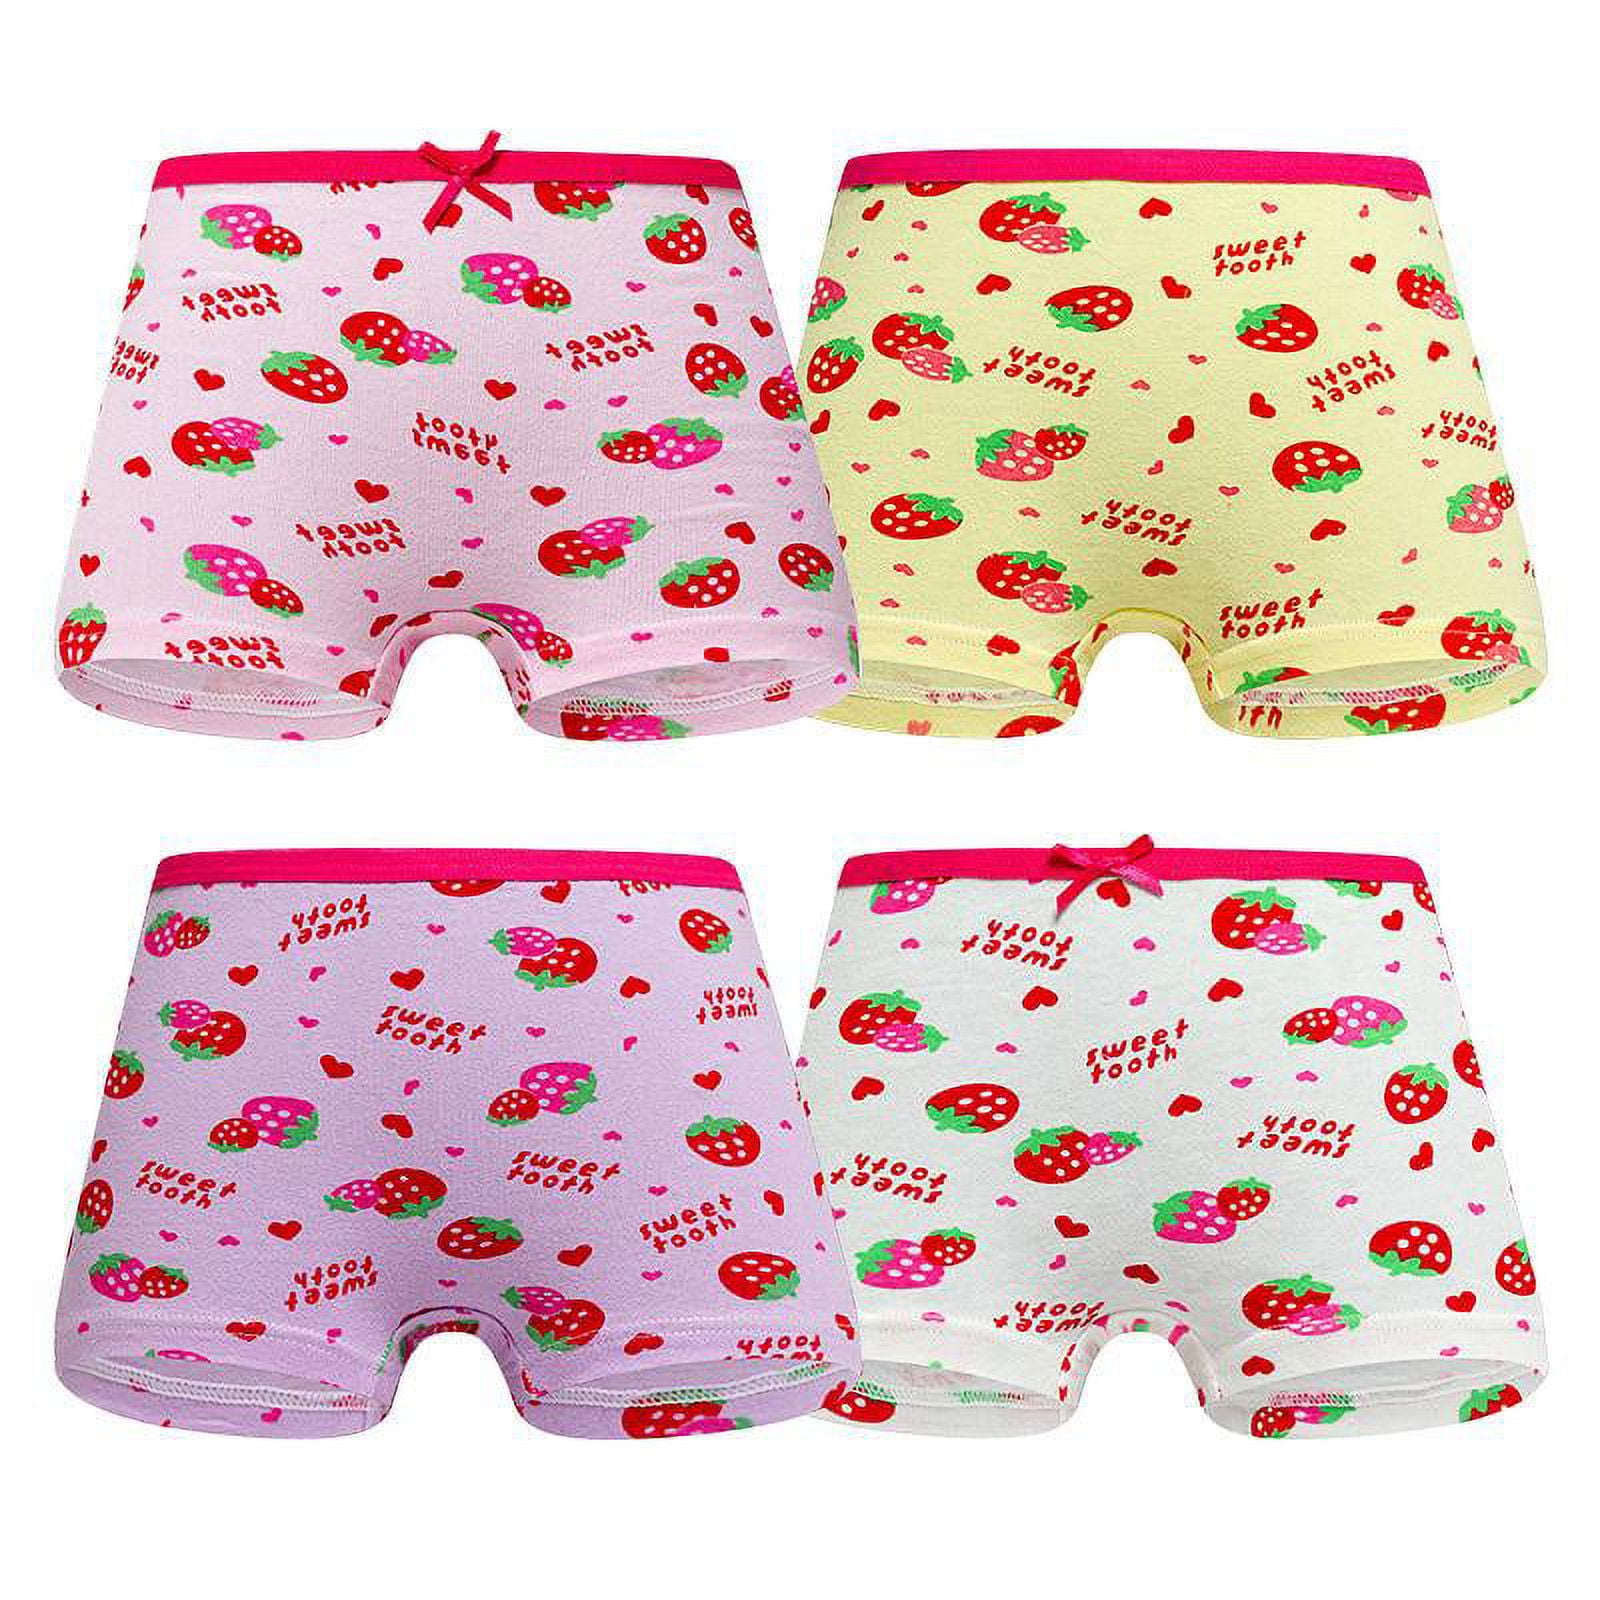 Kawaii Cartoon Pattern Cotton Boxer Gender Neutral Boxer Briefs For Girls,  2 16Y, Soft Pants Set Of 4 From Huoyineji, $10.48